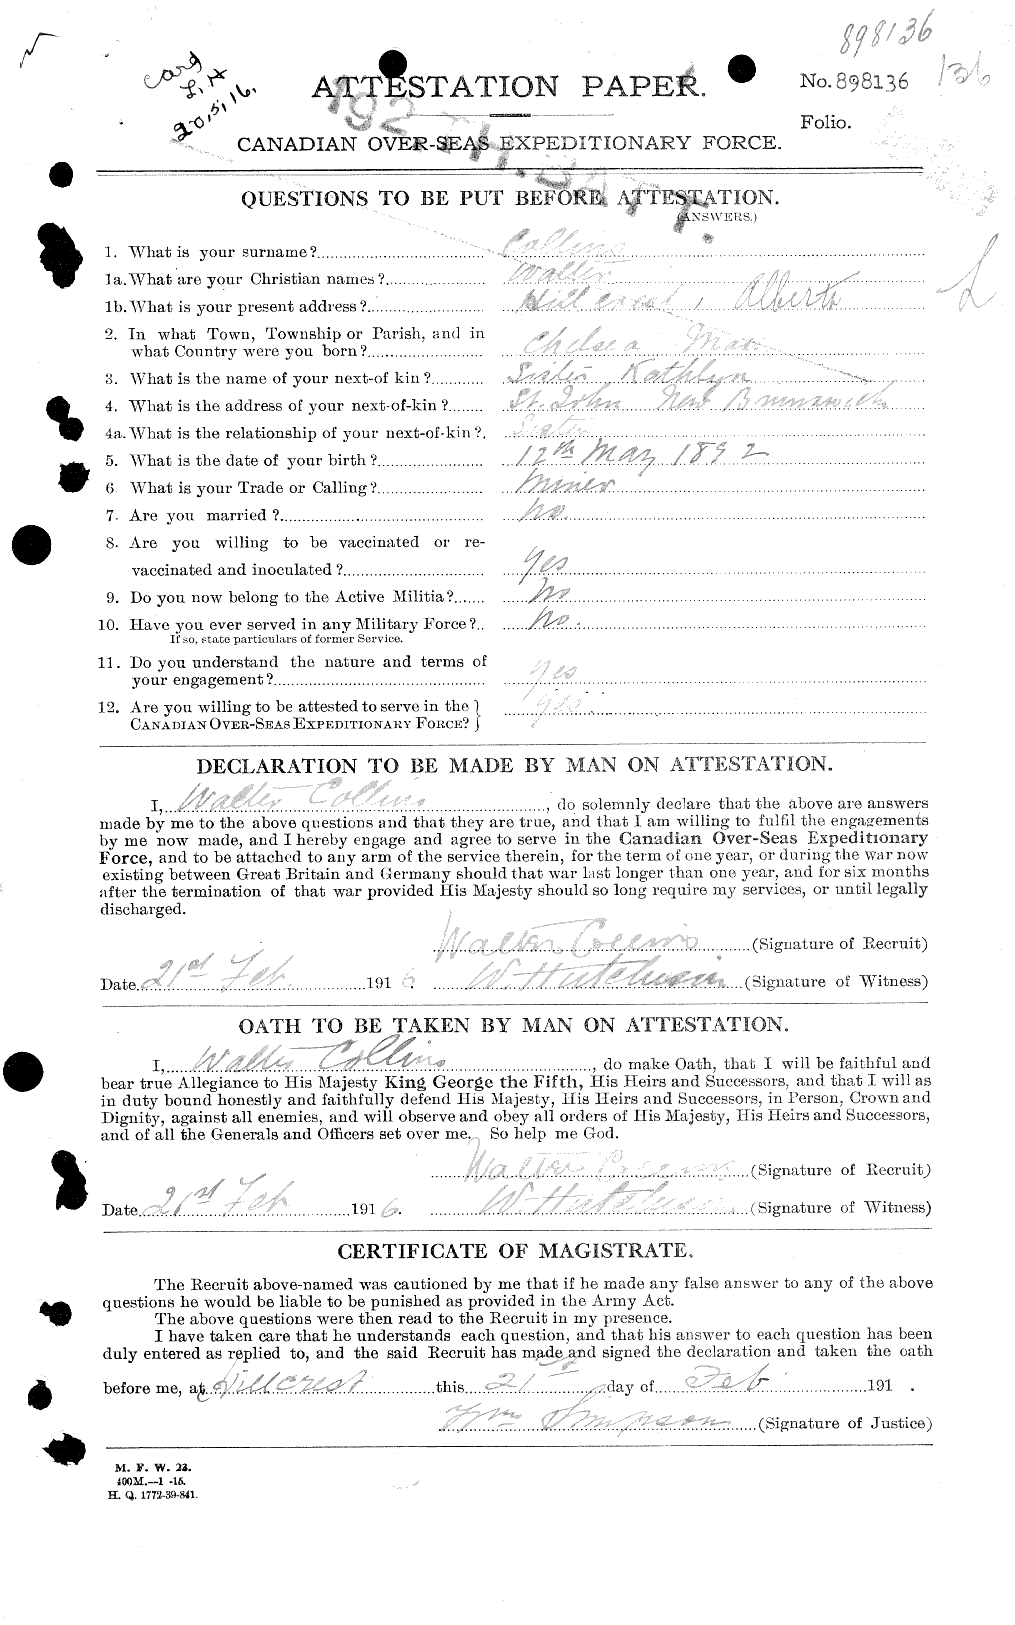 Personnel Records of the First World War - CEF 040690a